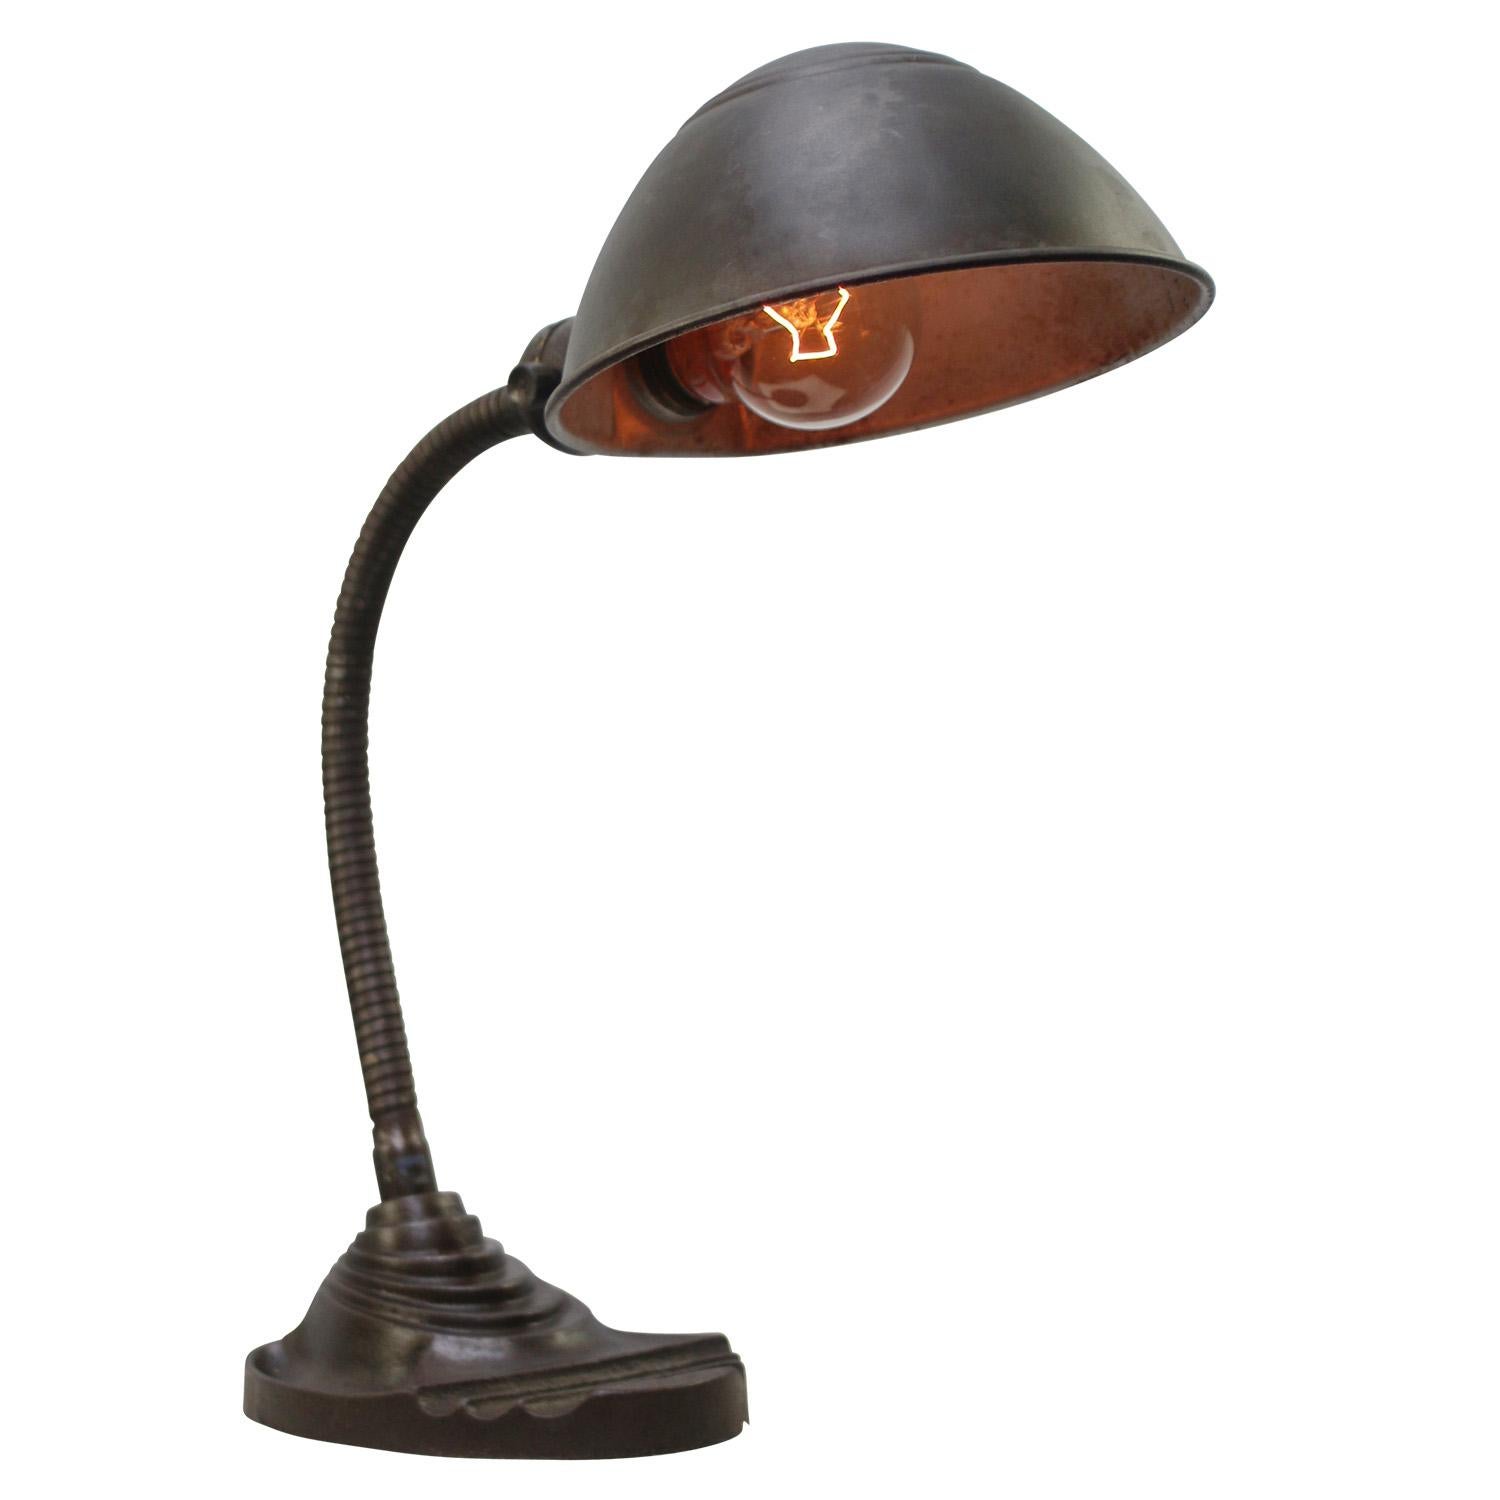 American goose neck desk light.
Flexible arm with metal shade.
Cast iron base. Black cotton wire and plug.

Available with US/UK plug

Weight: 1.30 kg / 2.9 lb

Priced per individual item. All lamps have been made suitable by international standards